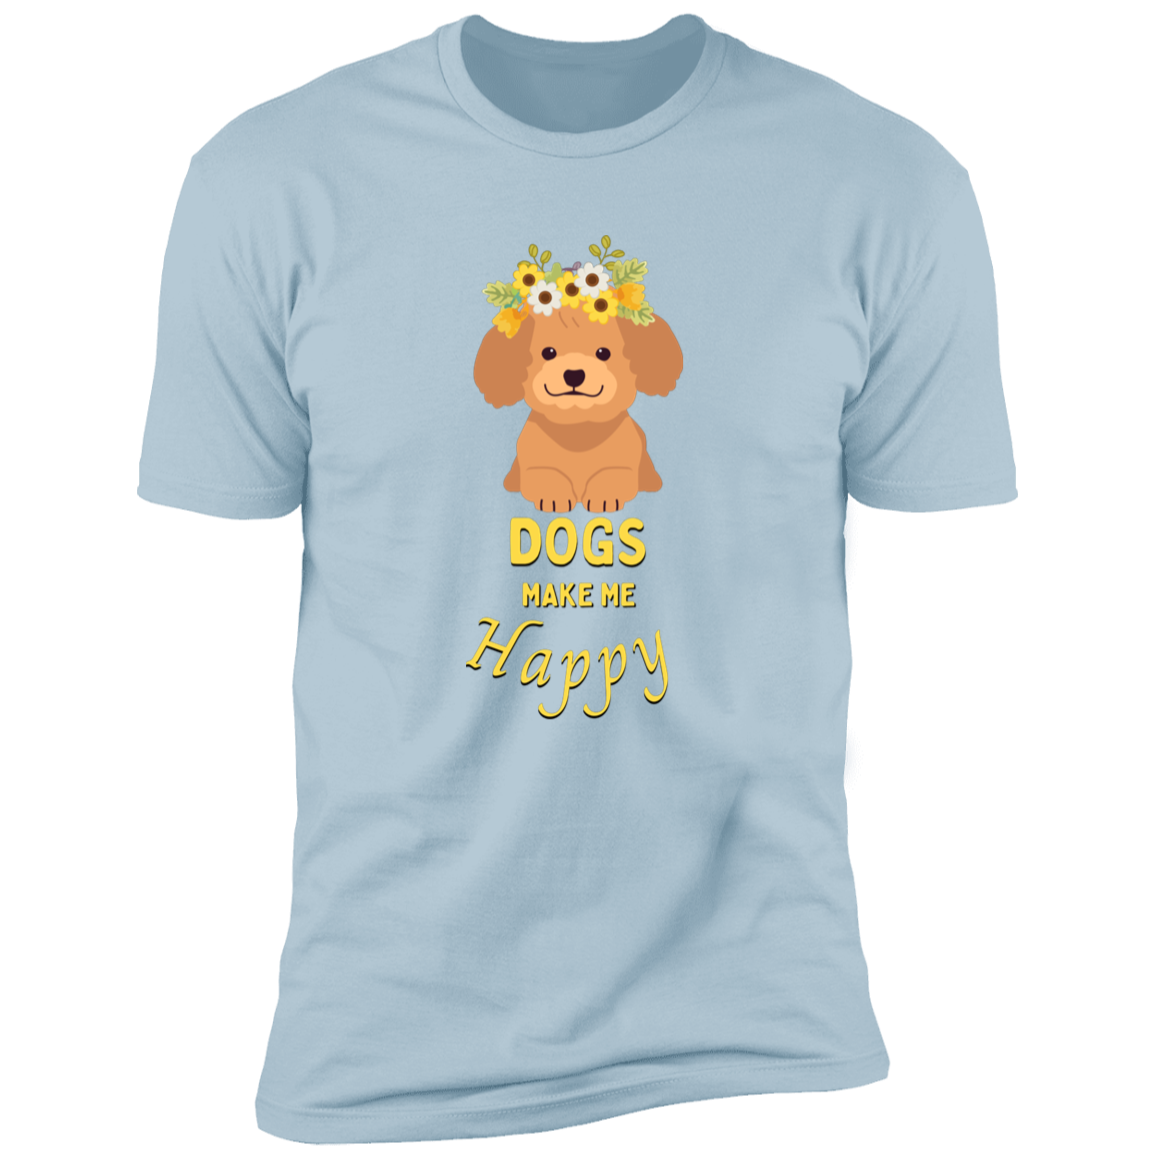 Dogs Make Me Happy t-shirt, funny dog shirt for humans, in light blue